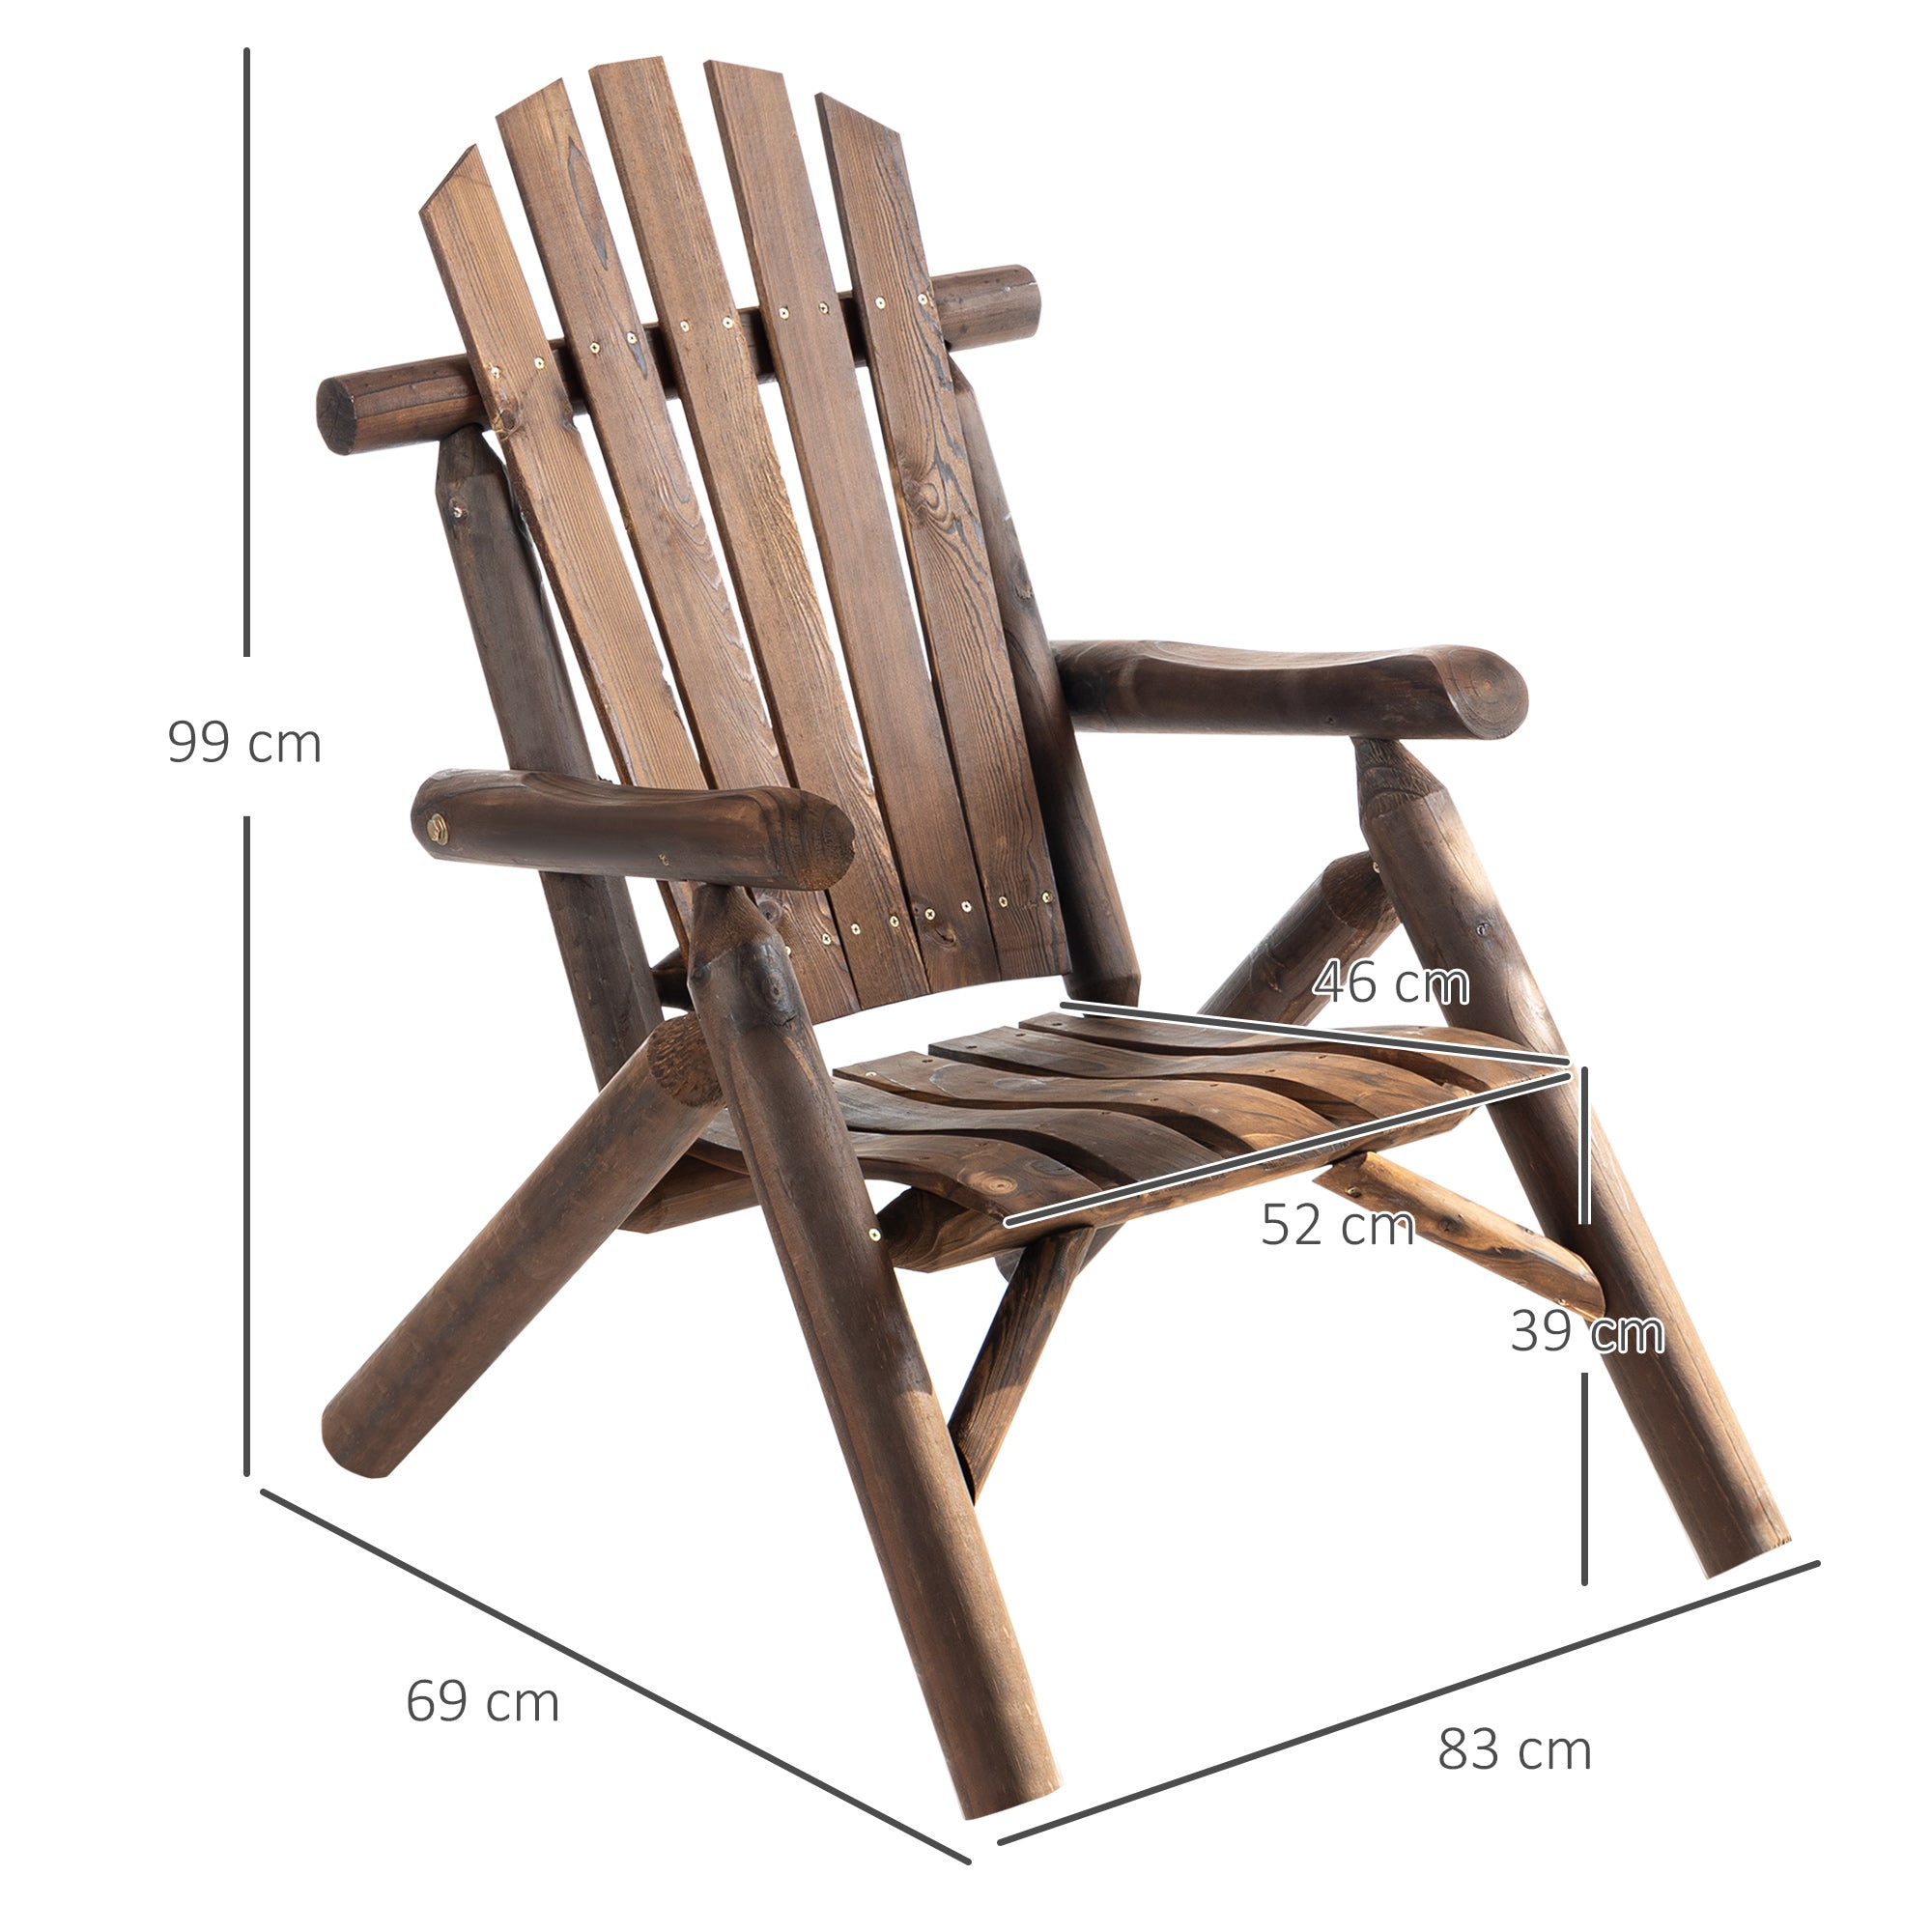 Outsunny Wooden Adirondack Chair w/ Ergonomic Design and Fir Wood Frame Garden Patio Furniture for Lounging and Relaxing, Carbonized Color - Inspirely